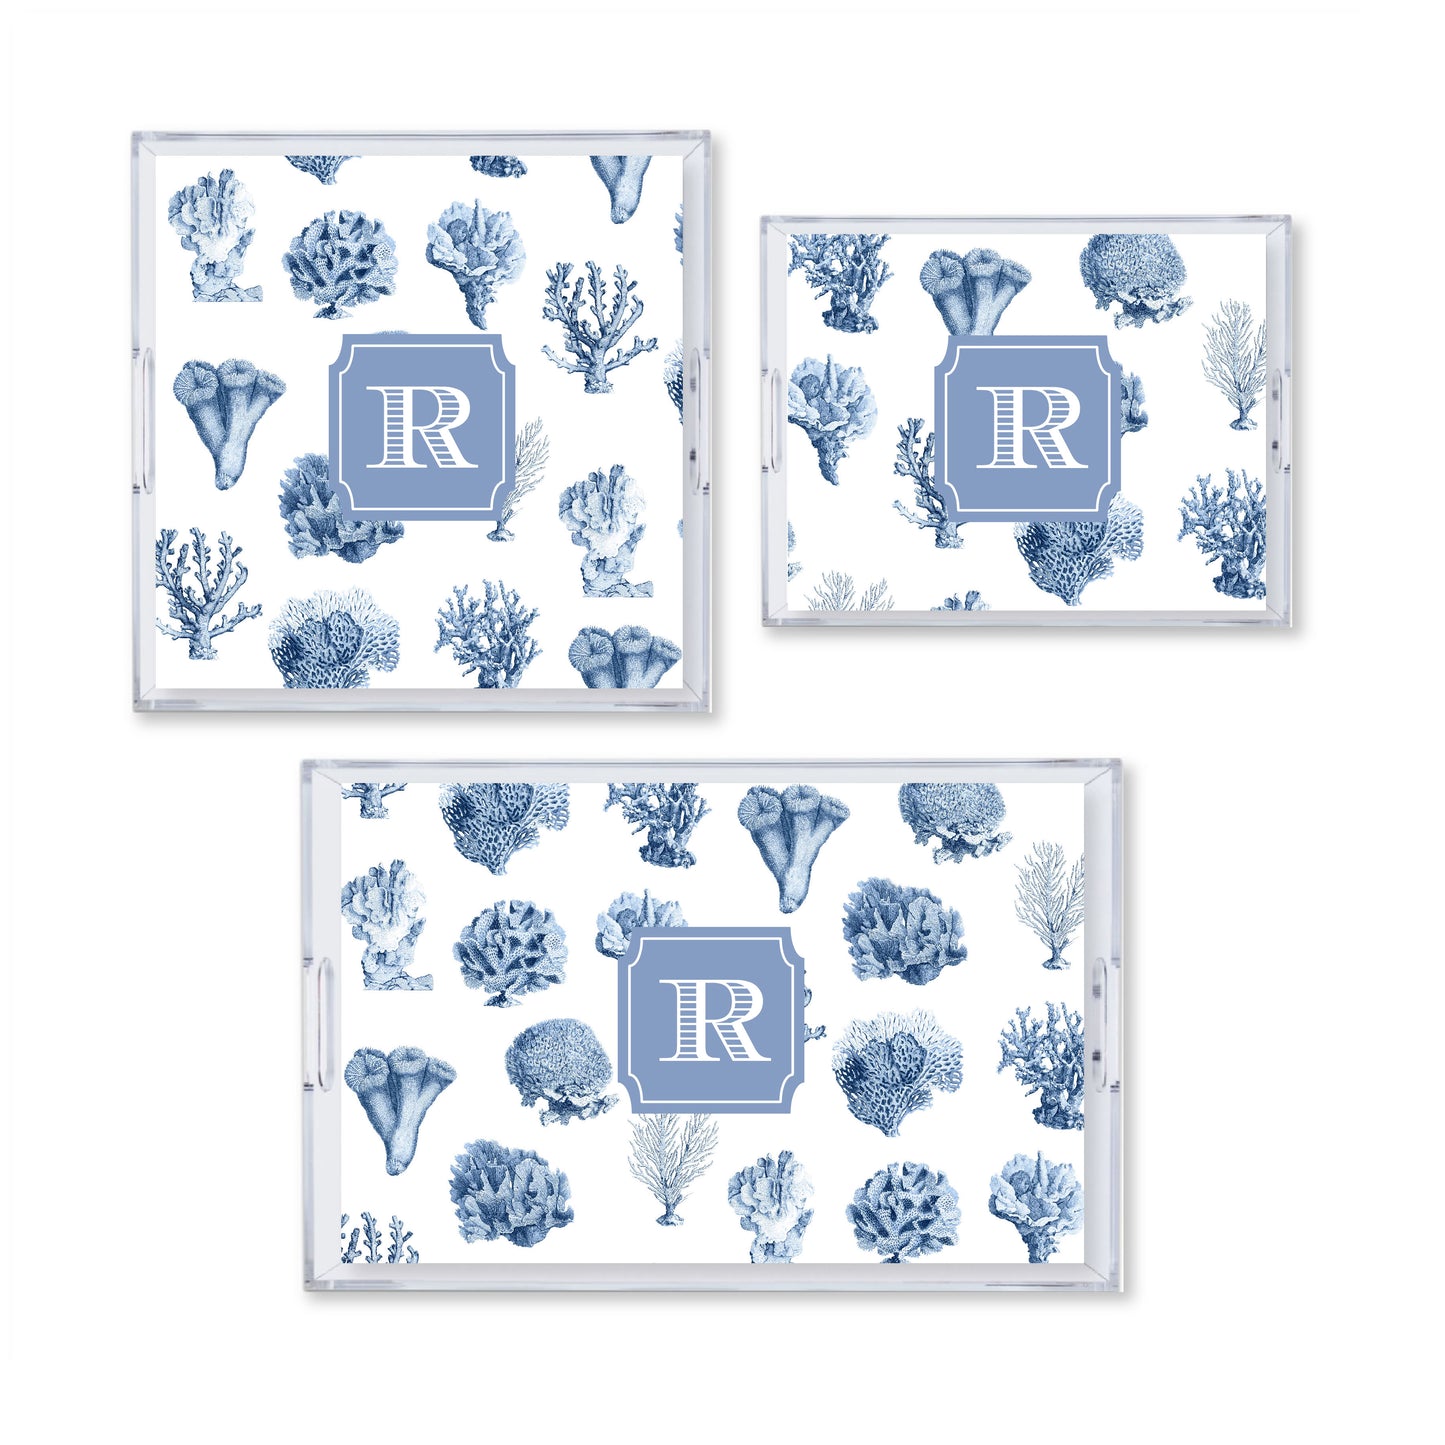 Coral Seas Reversible Acrylic Tray With Optional Monogram - Available In 3 Sizes